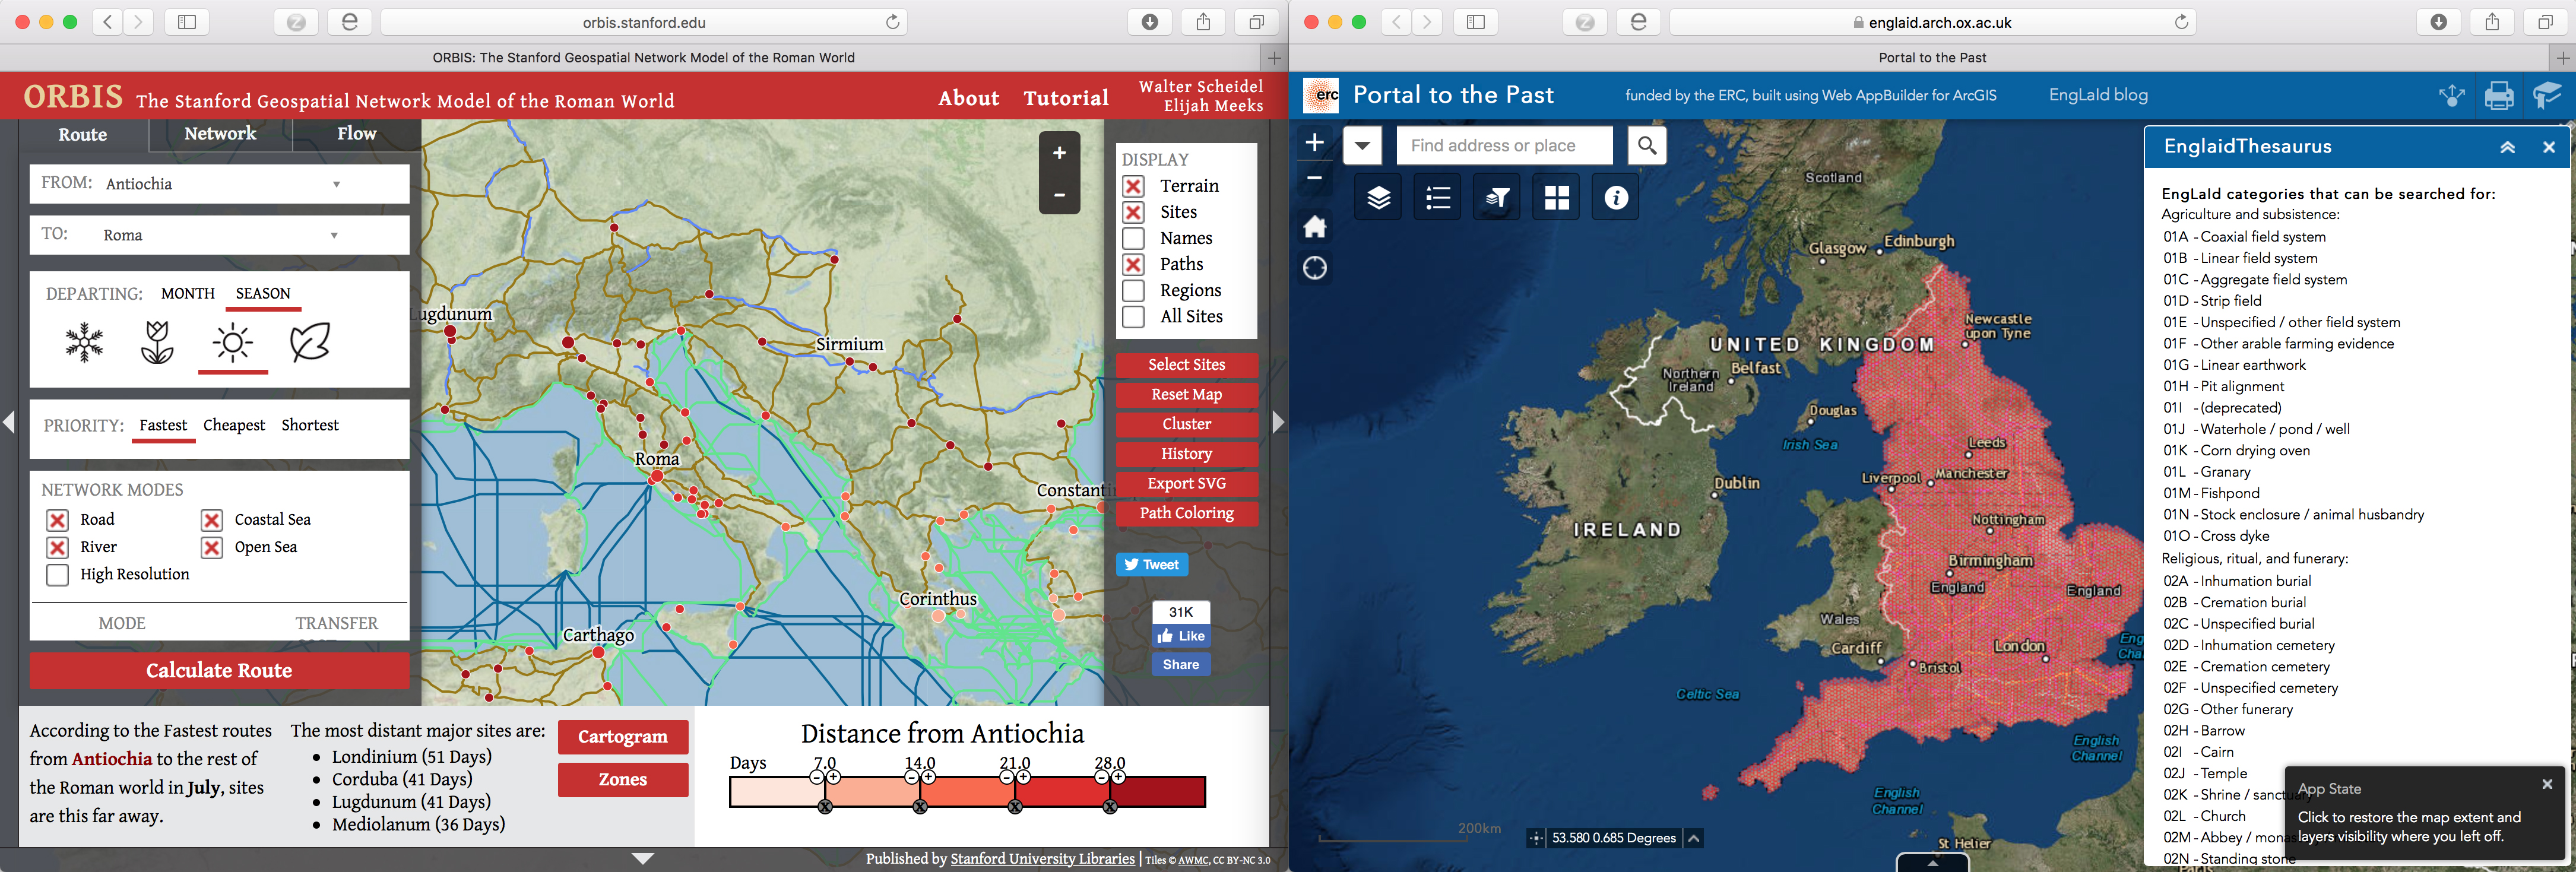 Figure 1 - Public-facing GIS tools from ORBIS and EngLaId.